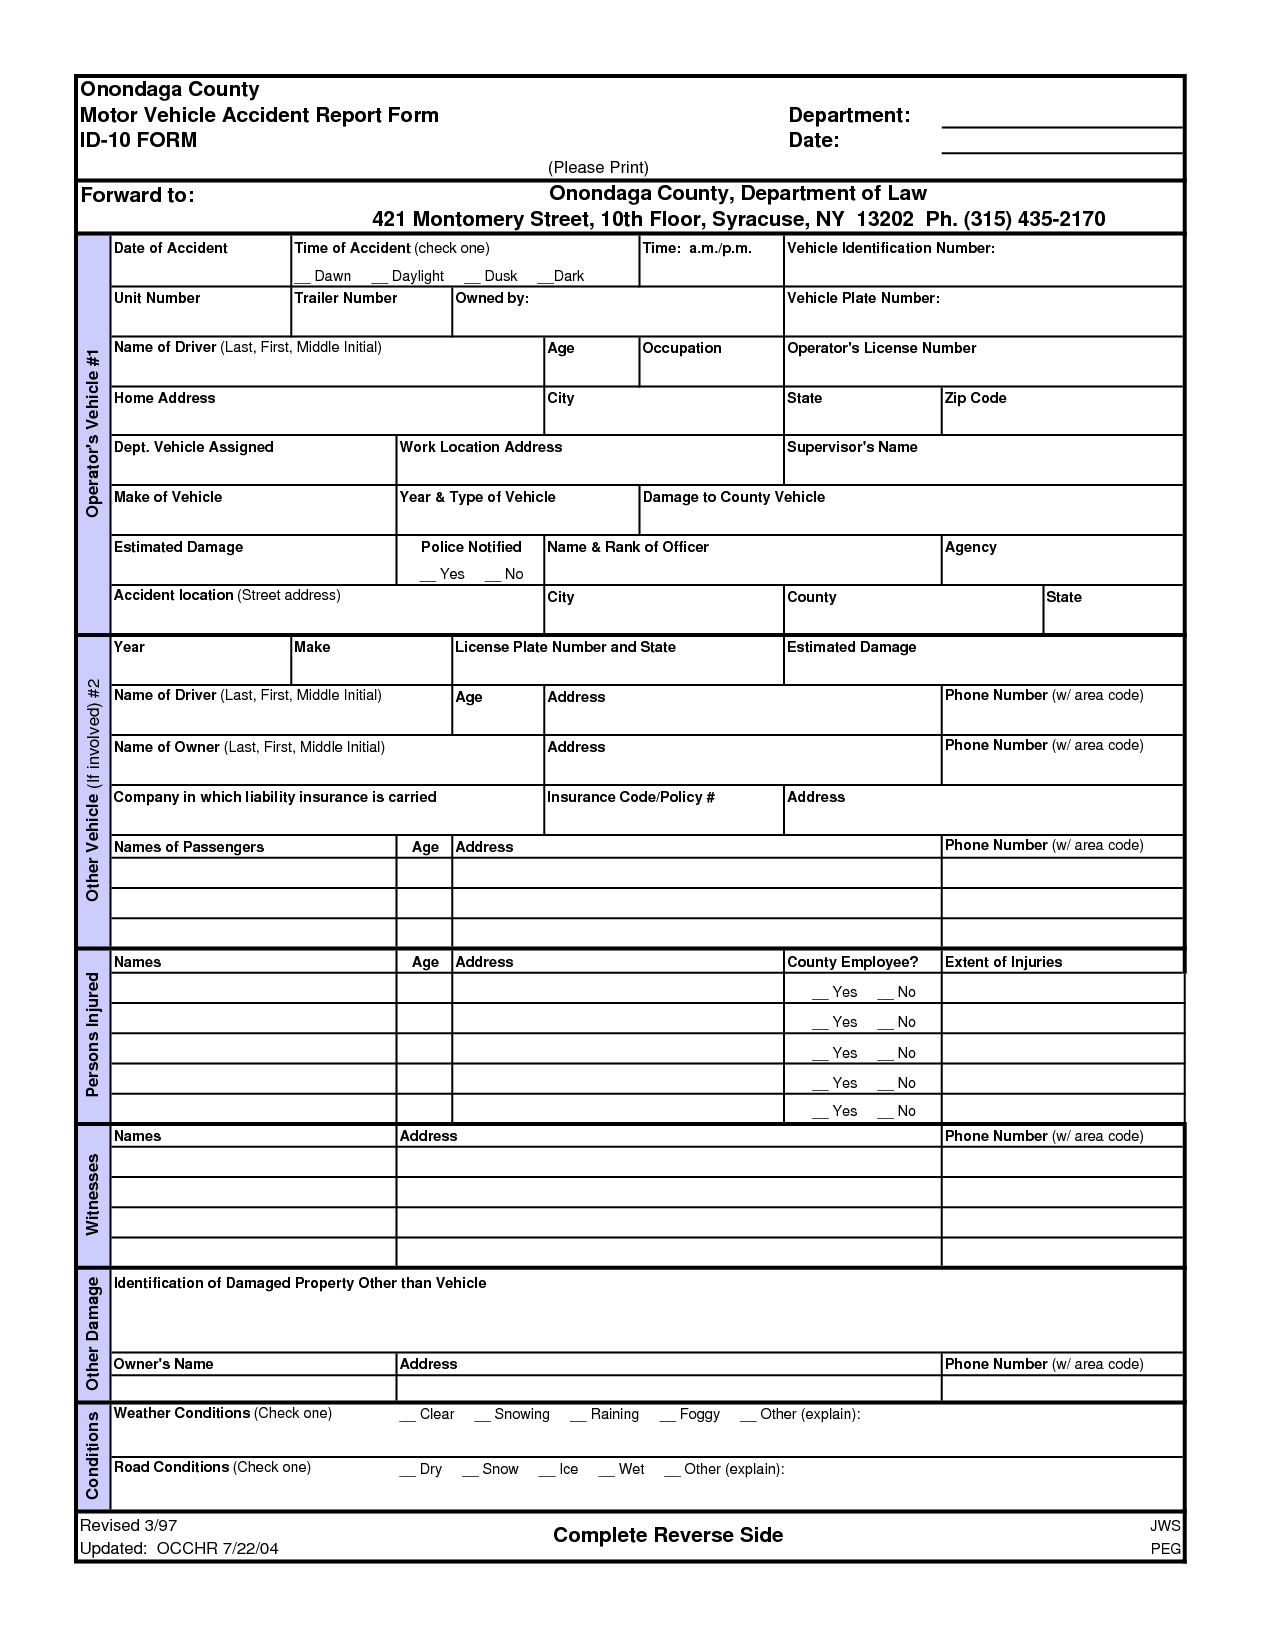 003 Auto Accident Report Form Template Ideas Motor Vehicle With Motor Vehicle Accident Report Form Template